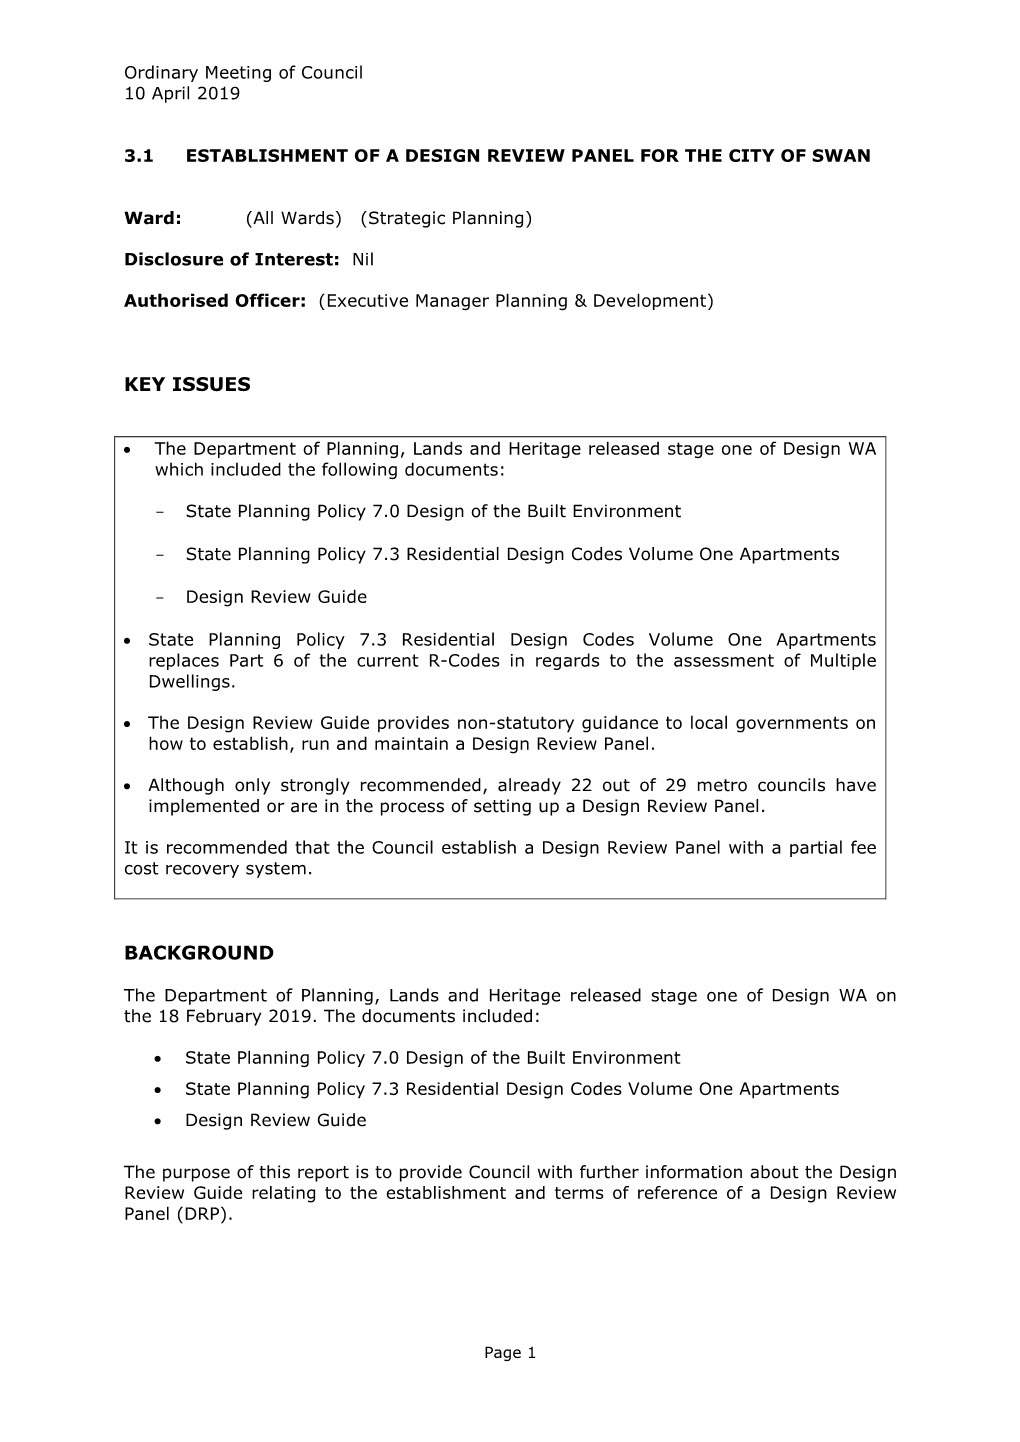 Establishment of a Design Review Panel for the City of Swan